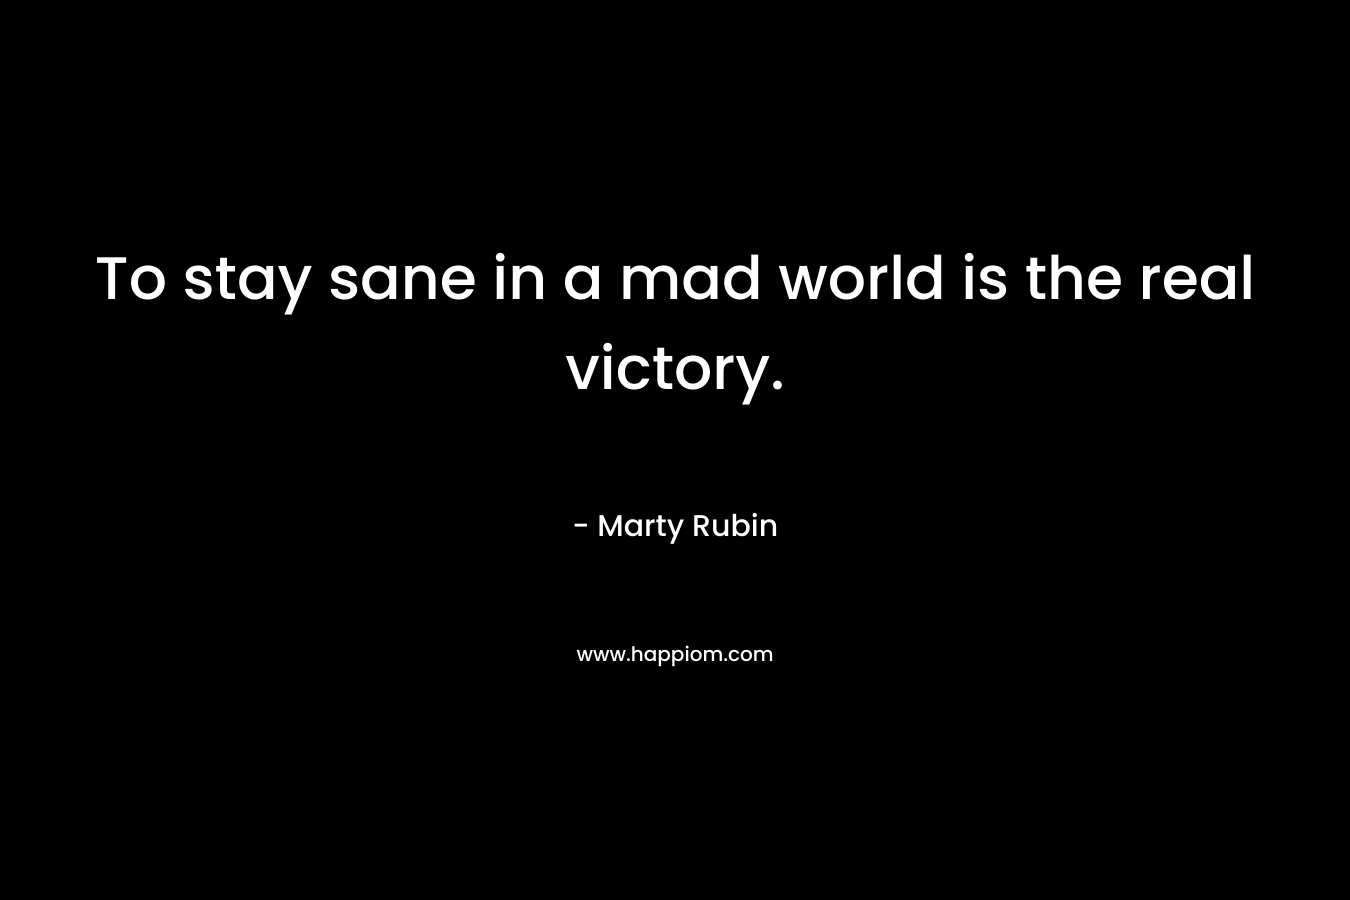 To stay sane in a mad world is the real victory.